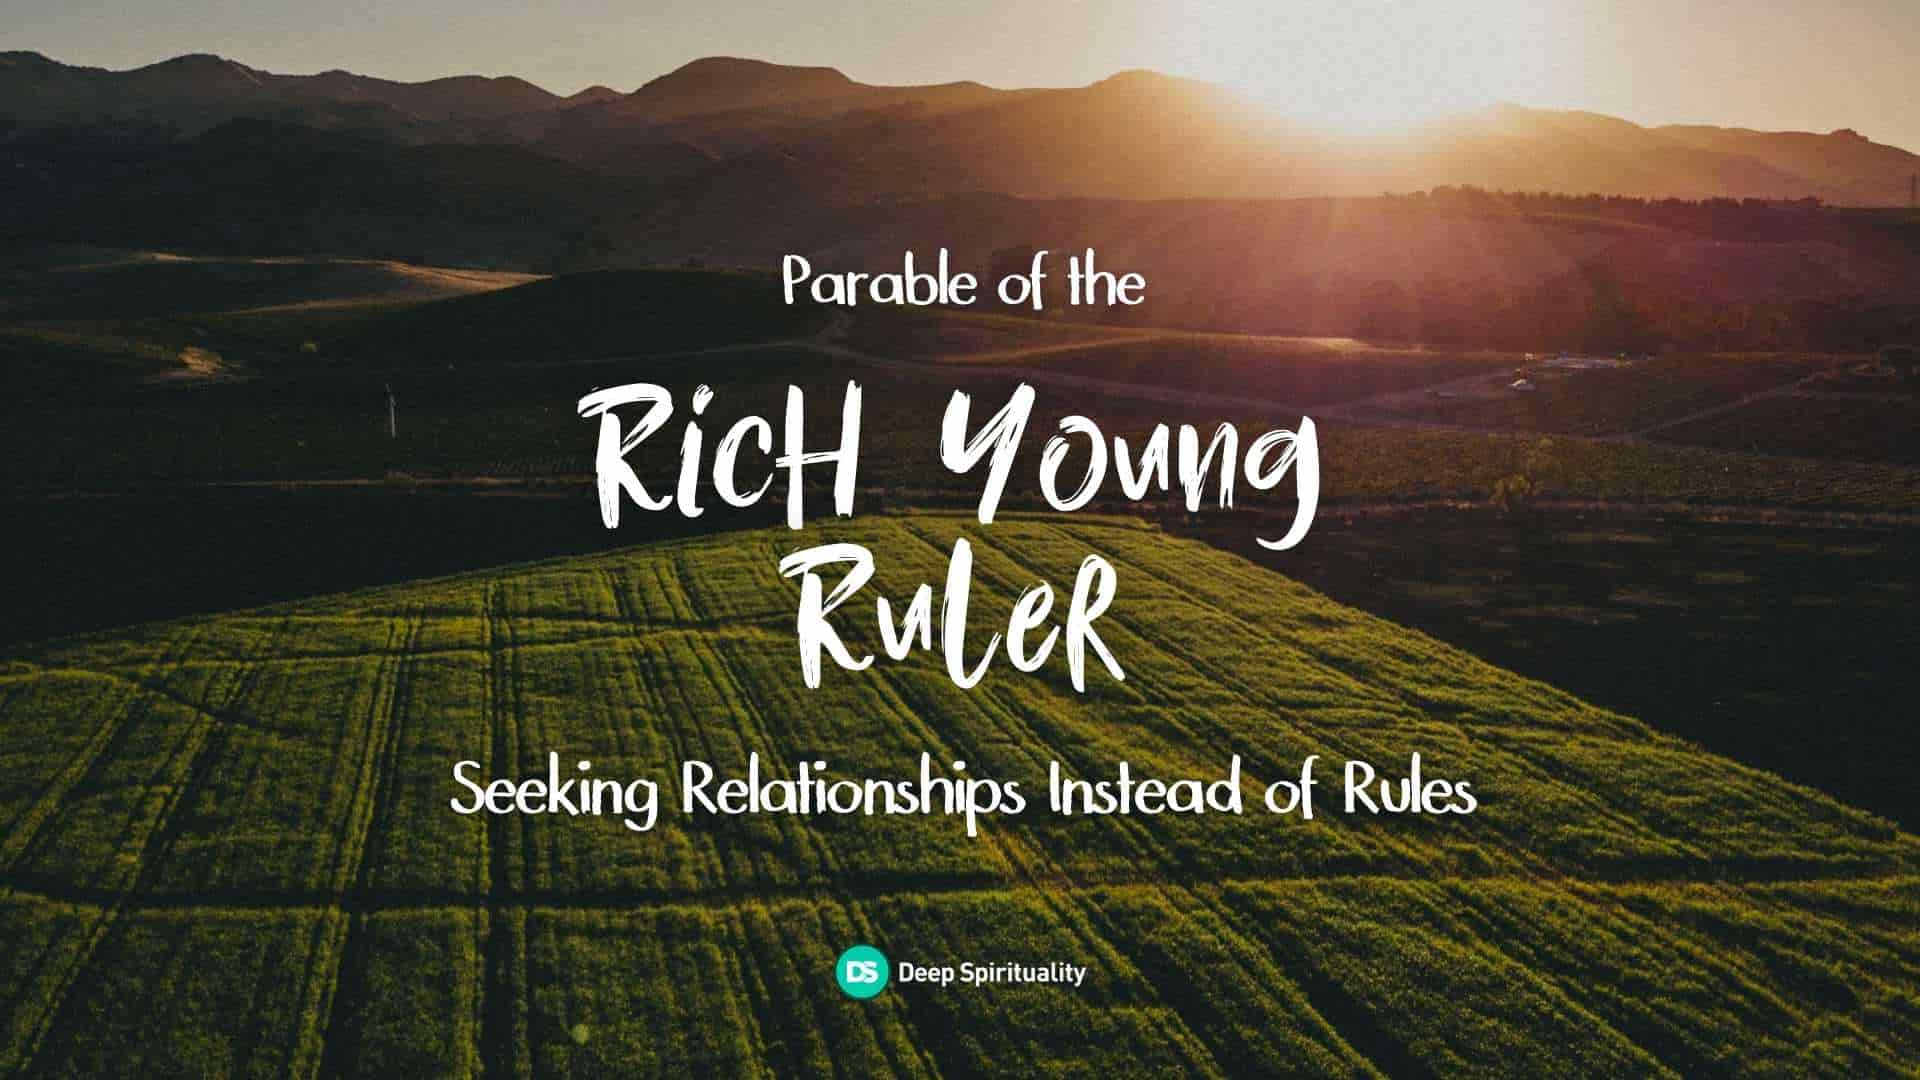 The Rich Young Ruler: How to Stop Seeing Rules and Start Seeing Relationship 3